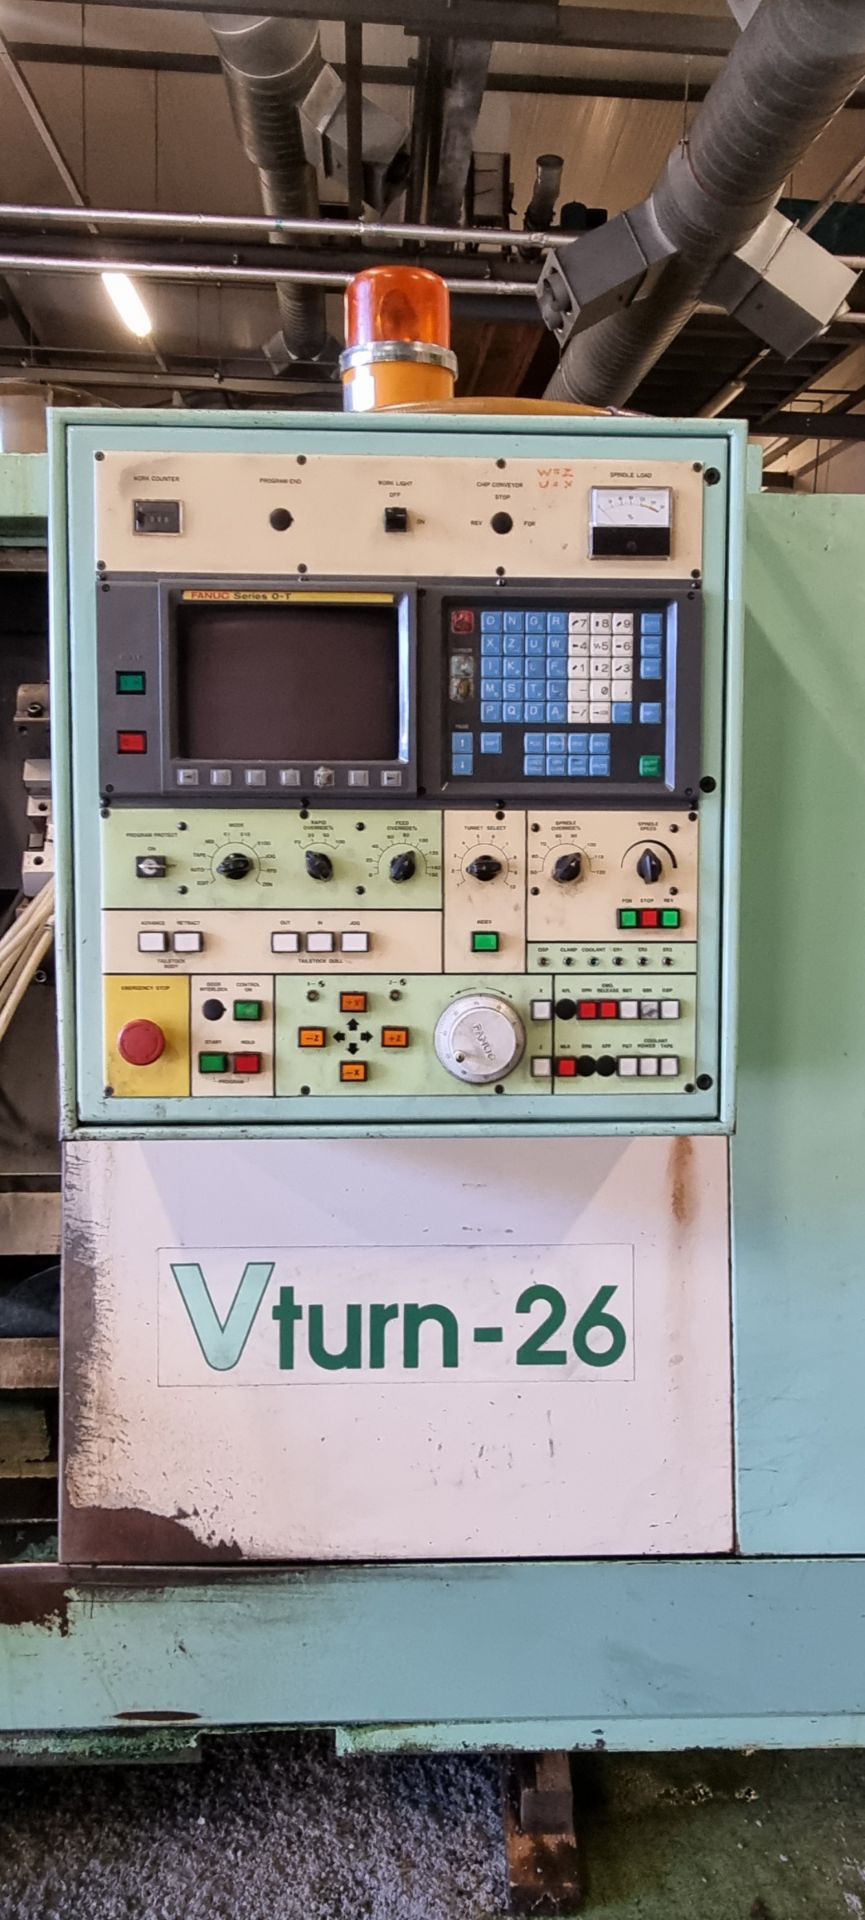 Victor Vturn-26 CNC lathe - Fanuc Series 0-T control and swarf conveyor - manufactured 1995 - 415v - Image 2 of 11